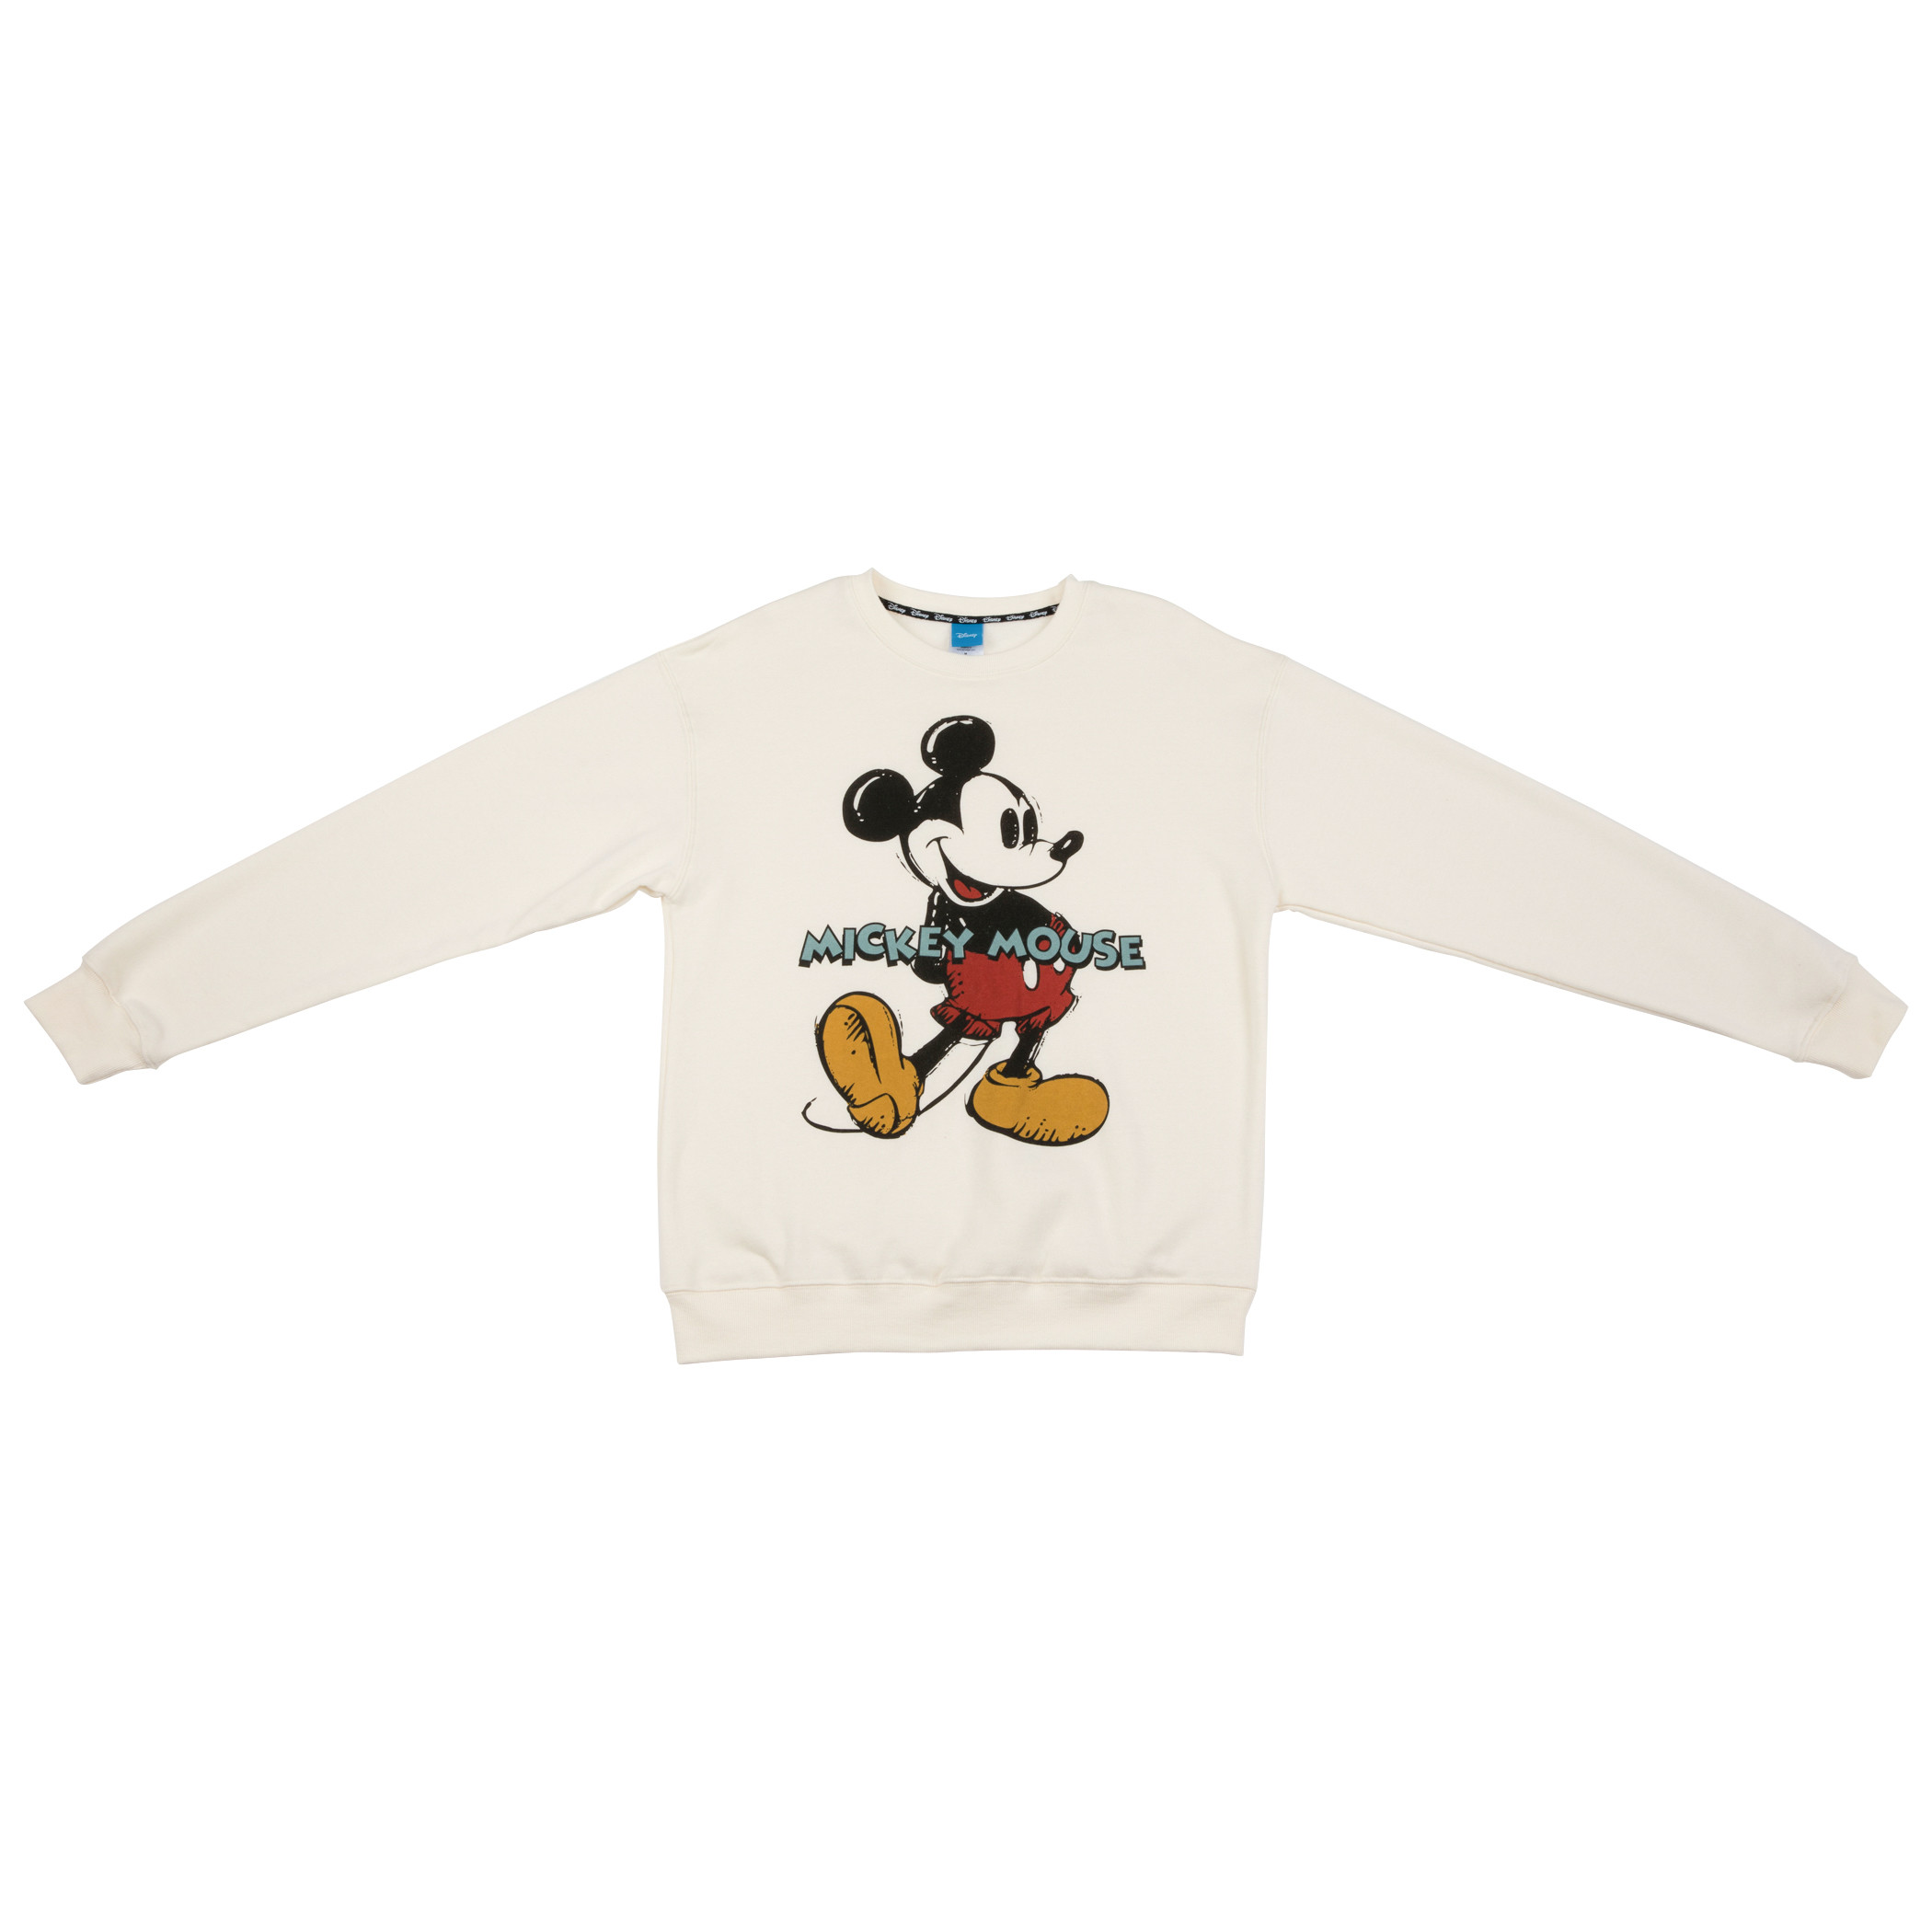 Mickey Mouse Colored Pencil Sketch Fleece Sweater